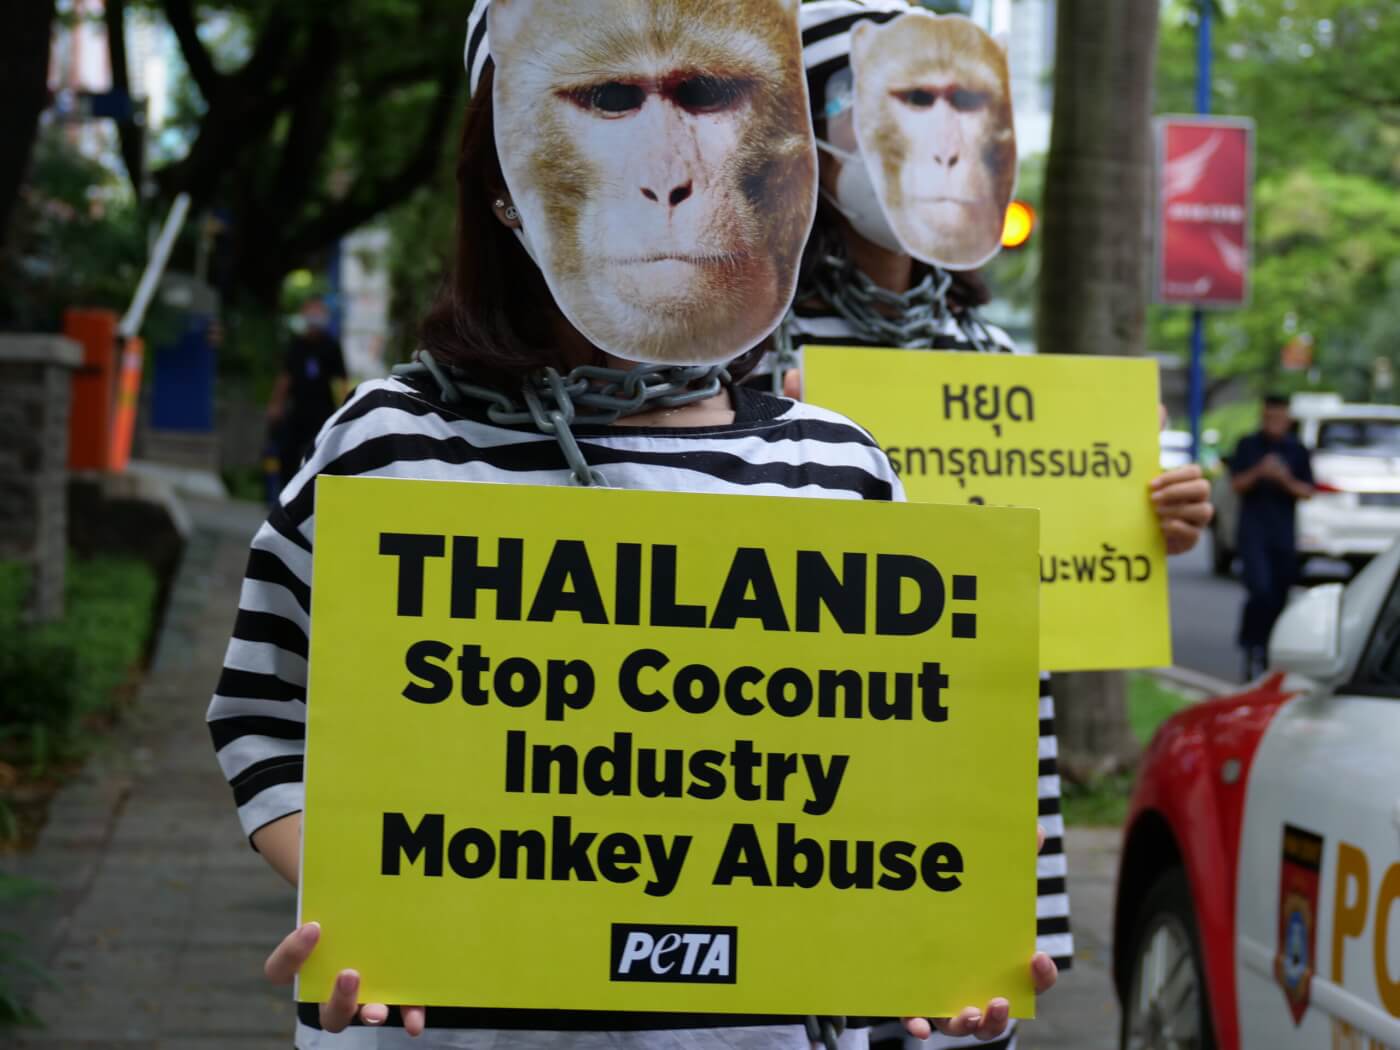 Chained ‘Monkeys’ Protest Coconut Industry at Thai Embassy in Jakarta, Indonesia